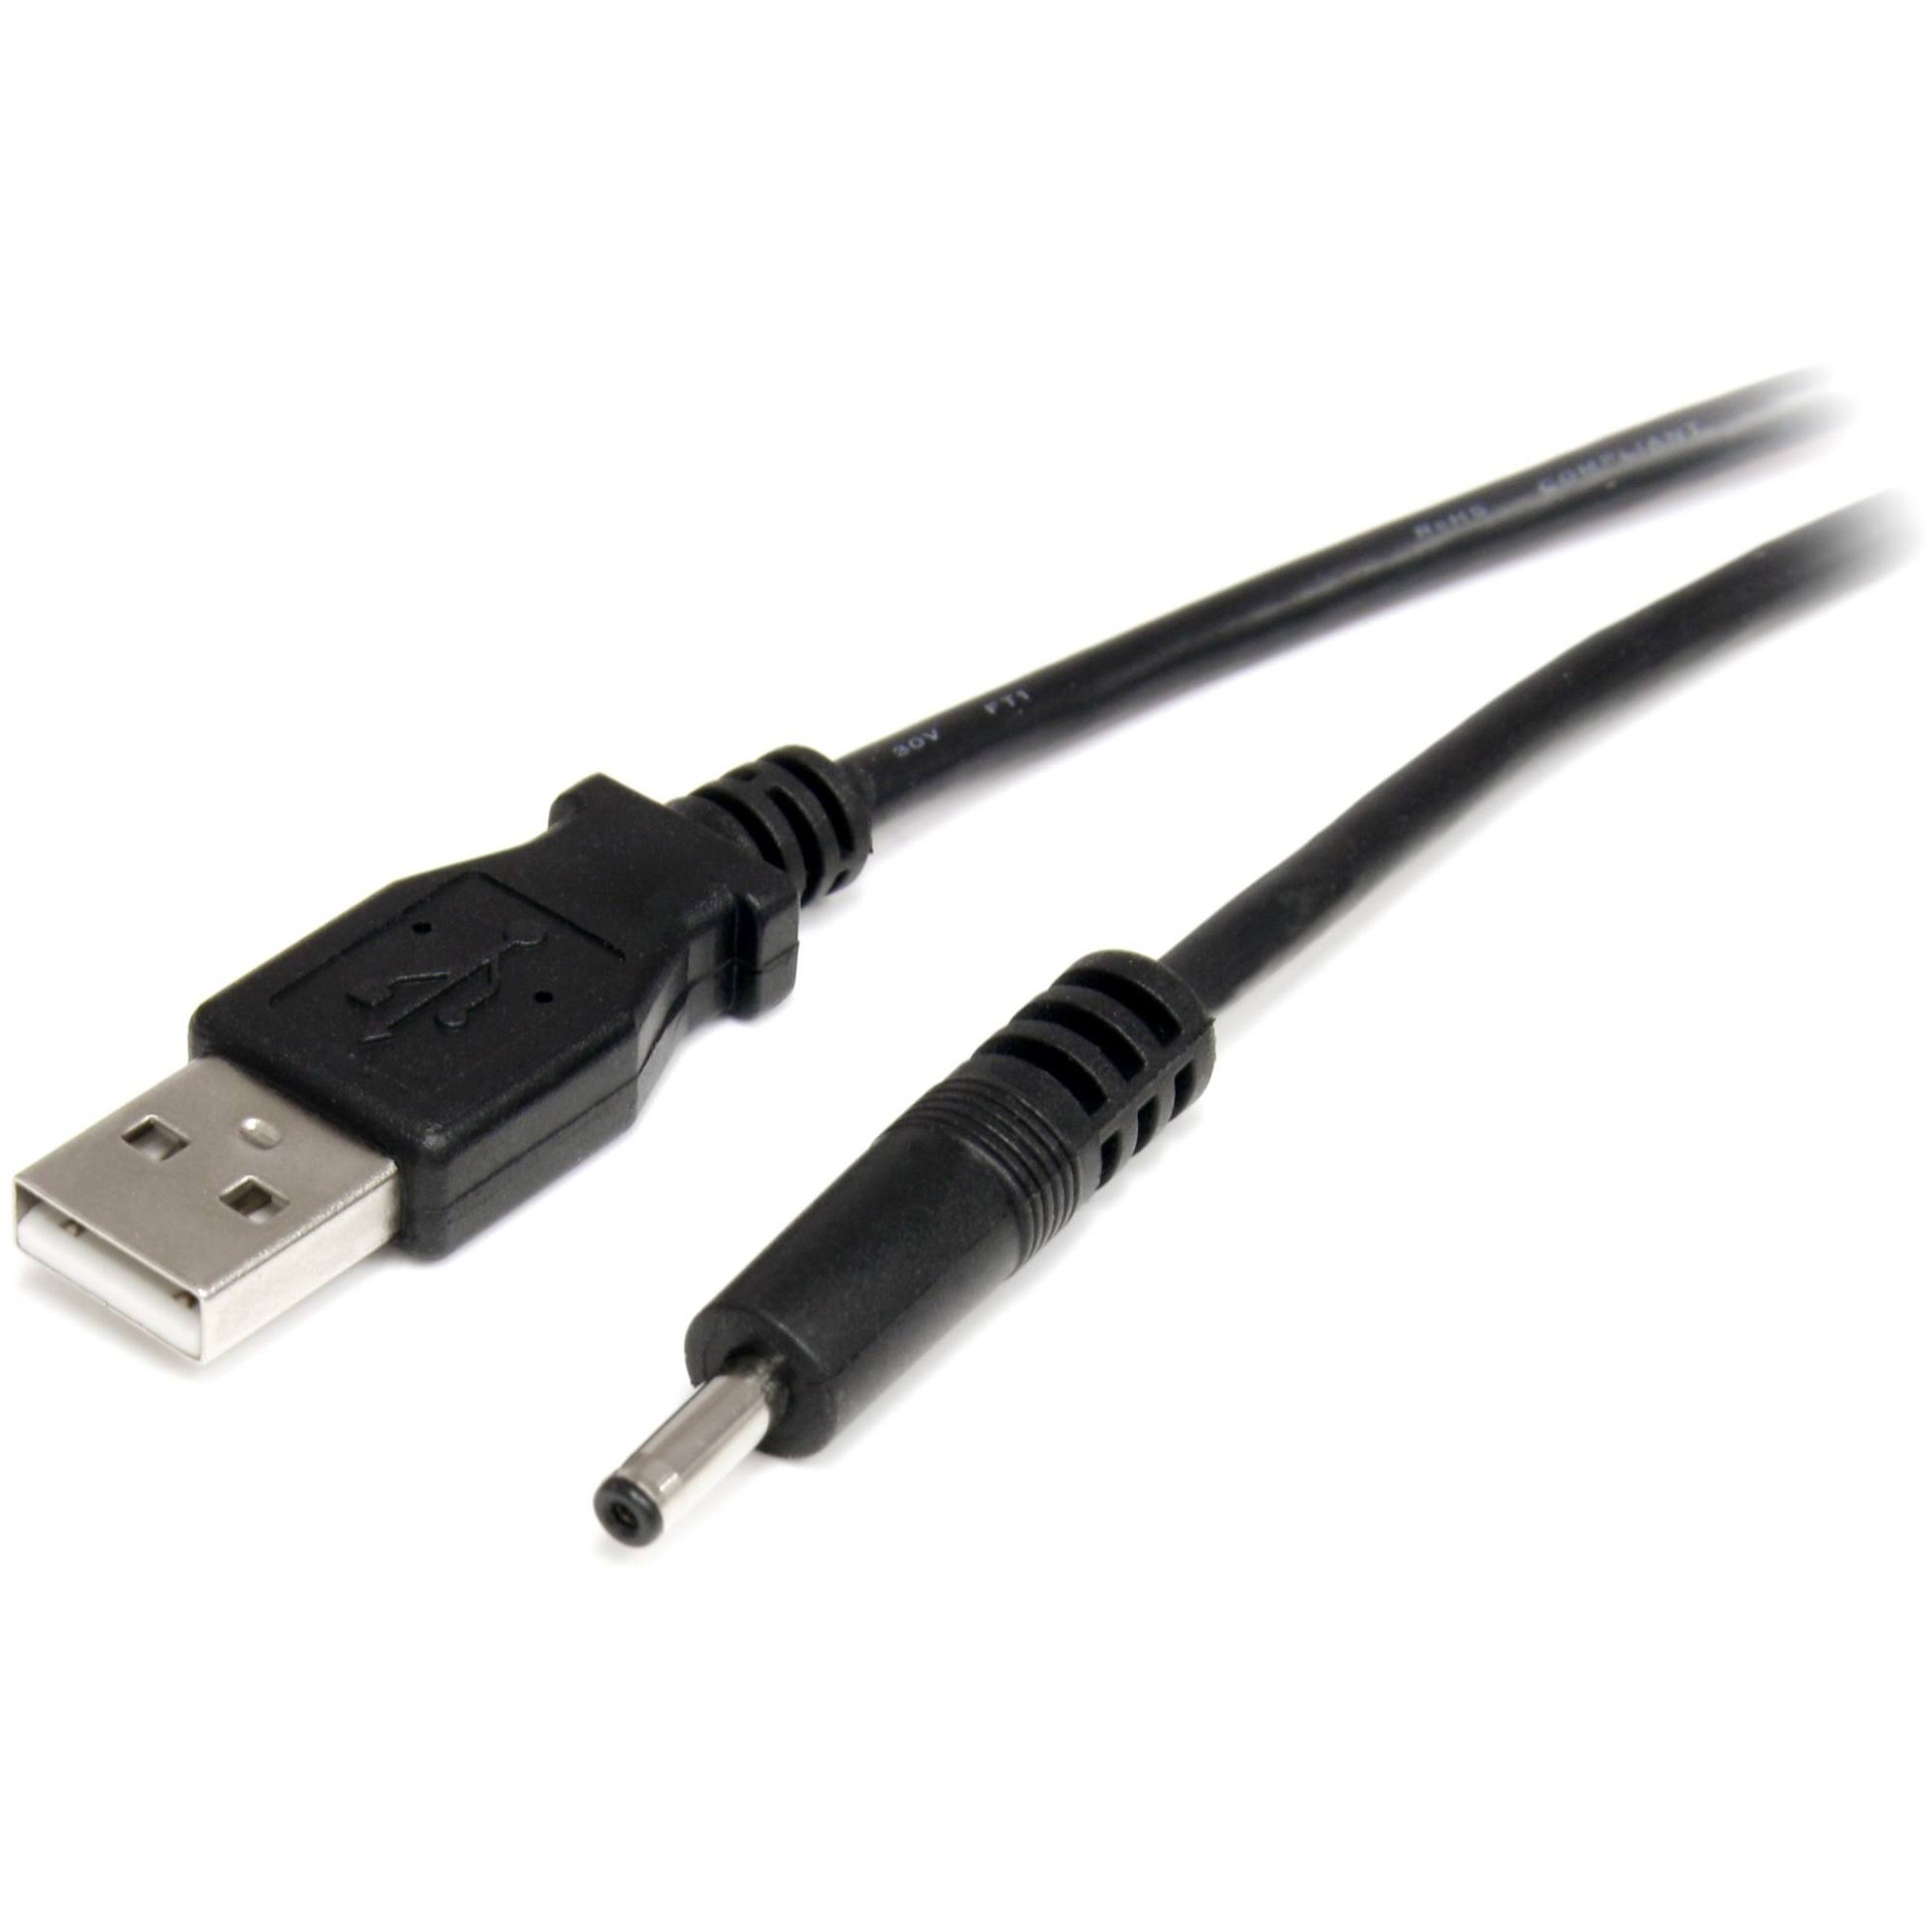 StarTech USB to Type H Barrel DC Power Cable - 5V, 2m